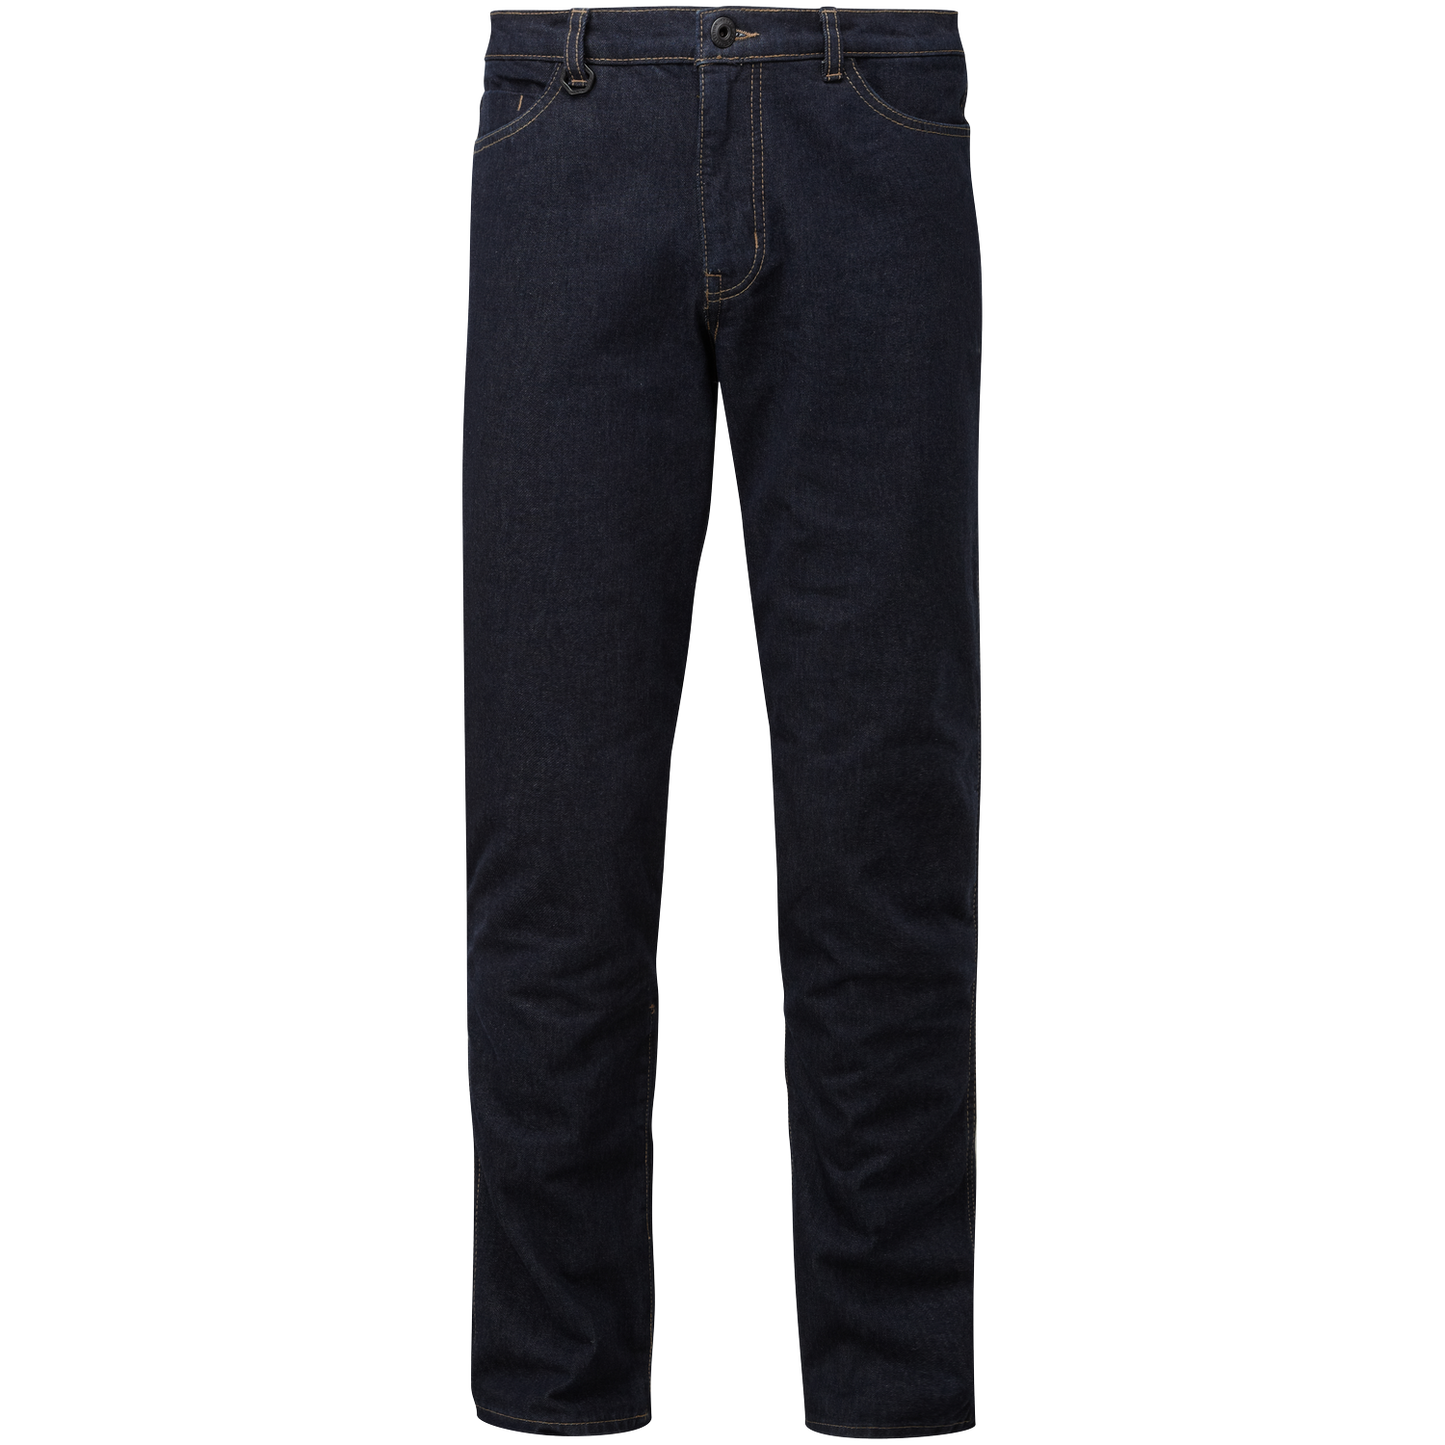 Allen Solly jeans collection (4363555143774)